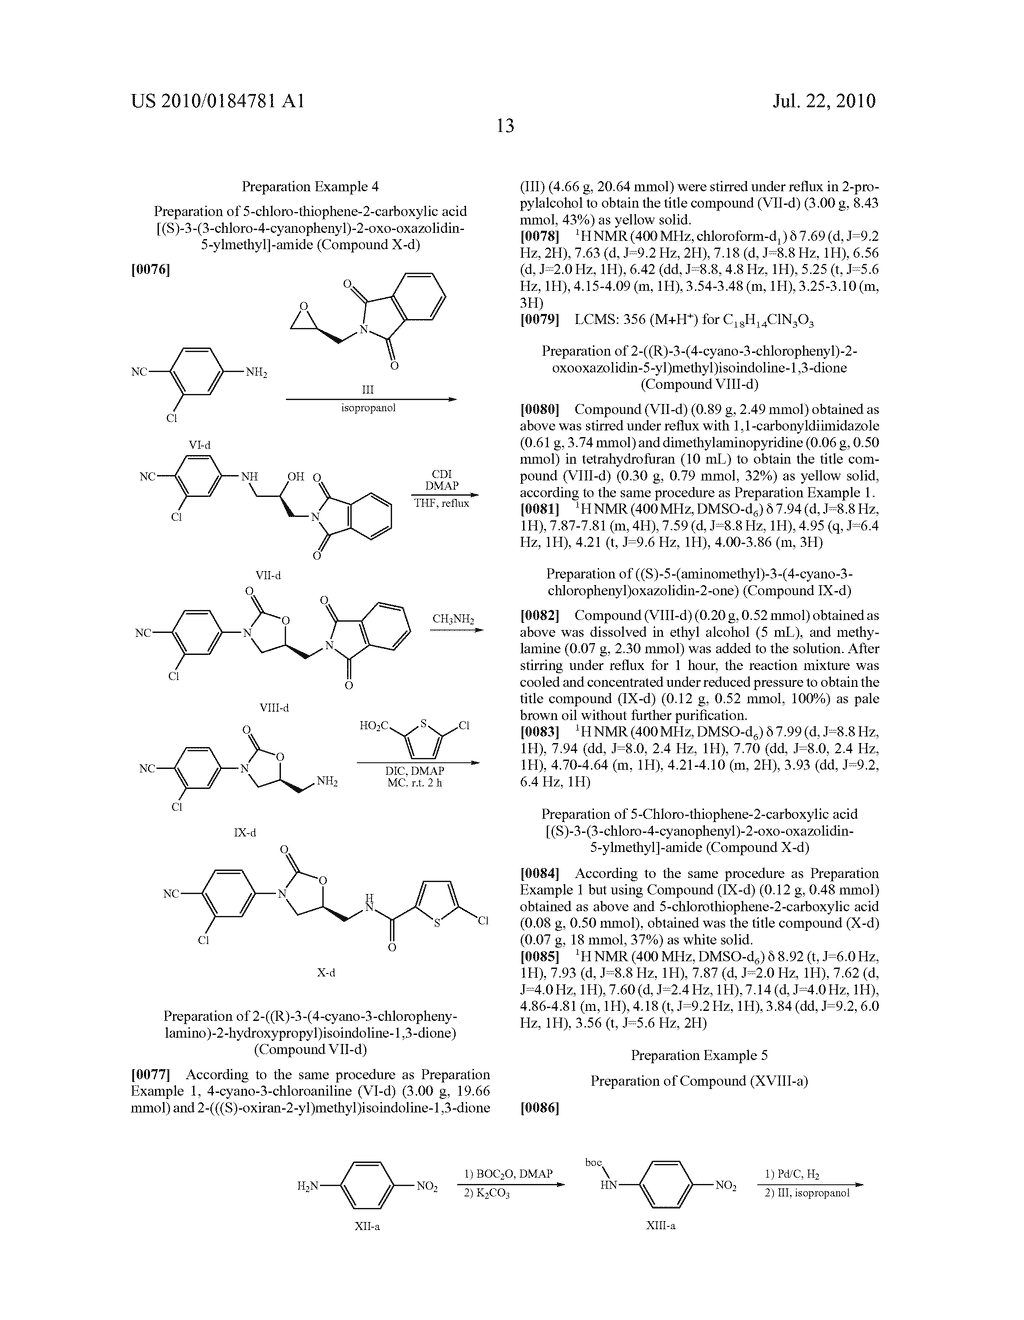 FXA INHIBITORS WITH CYCLIC AMIDINES AS P4 SUBUNIT, PROCESSES FOR THEIR PREPARATIONS, AND PHARMACEUTICAL COMPOSITIONS AND DERIVATIVES THEREOF - diagram, schematic, and image 15